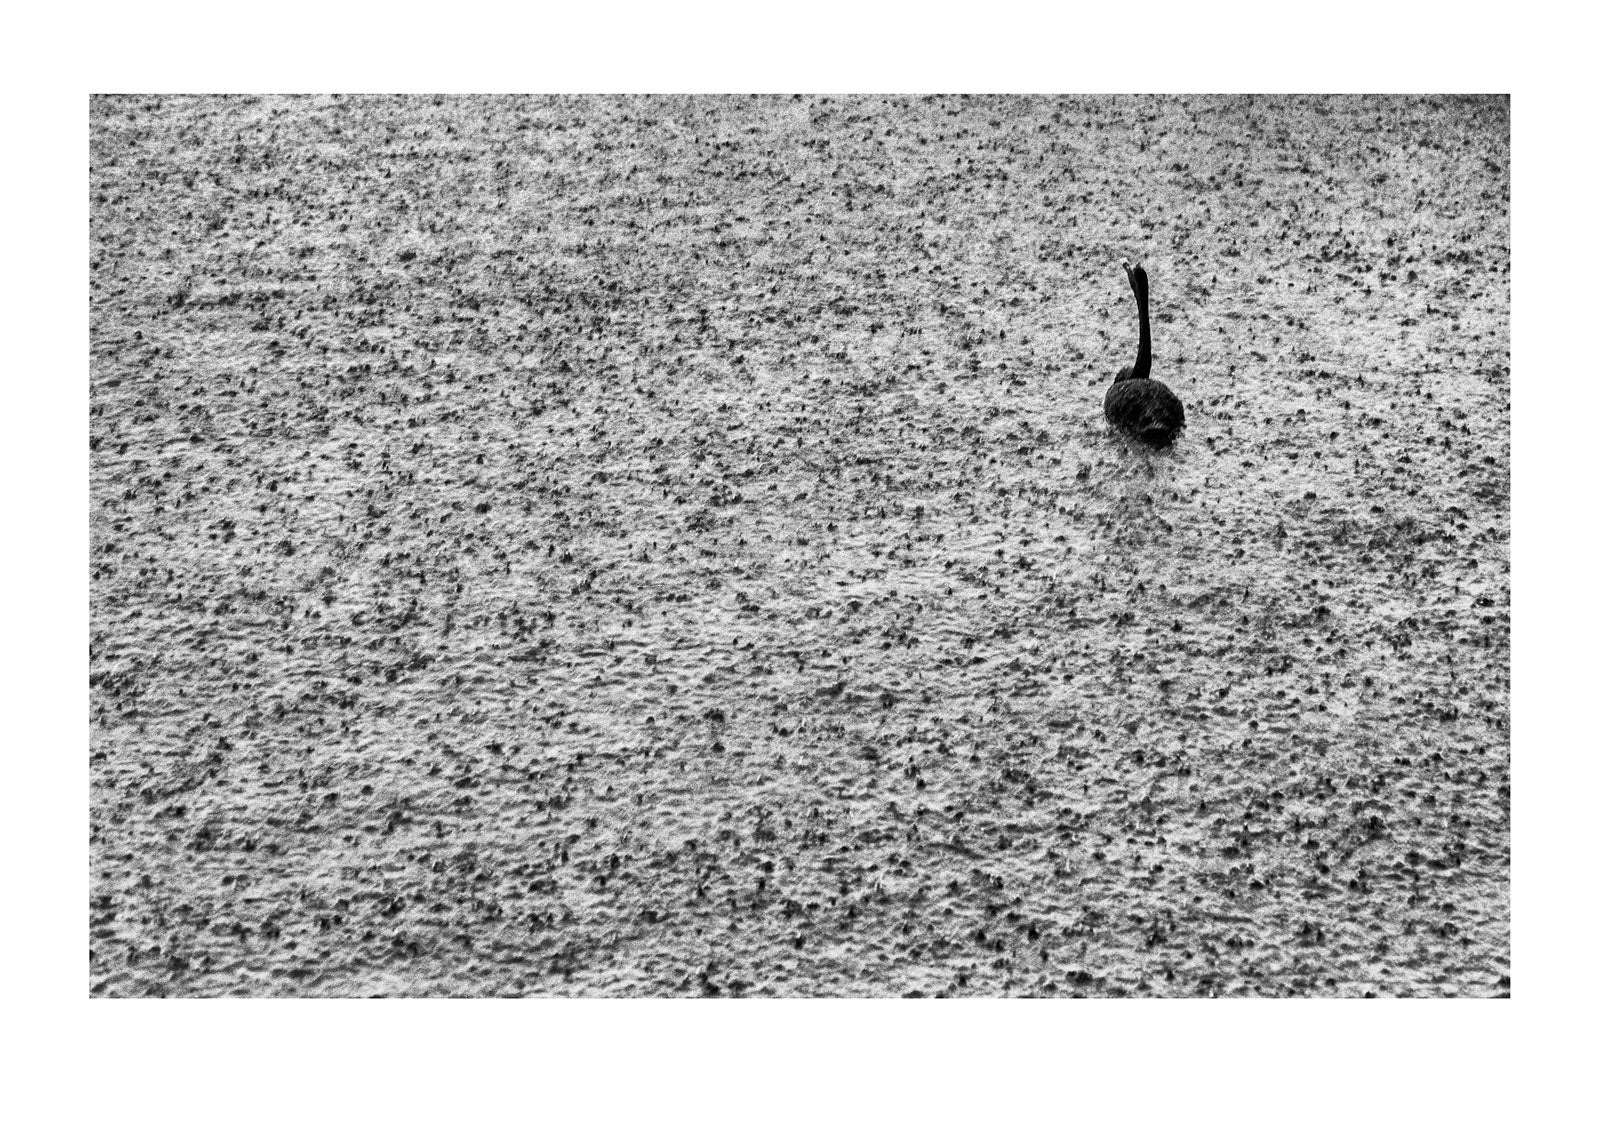 A Black Swan glides across the still waters of an inlet during a heavy downpour. Captured on Ilford HP5 black and white negative film. Metung, Victoria, Australia.